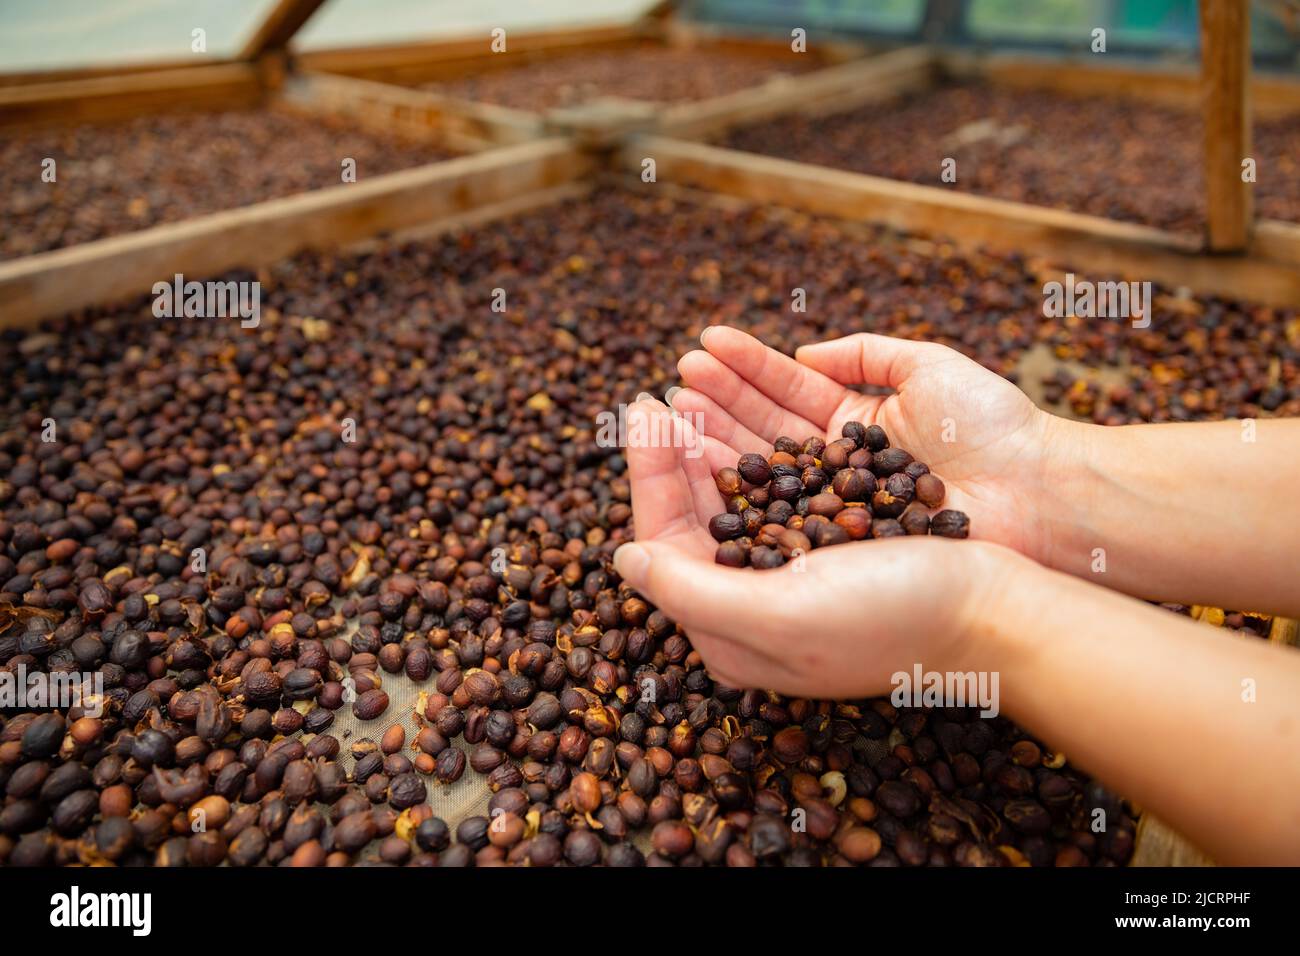 Side View of Female Worker Inspecting Dried Organic Raw Coffee Beans Stock Photo